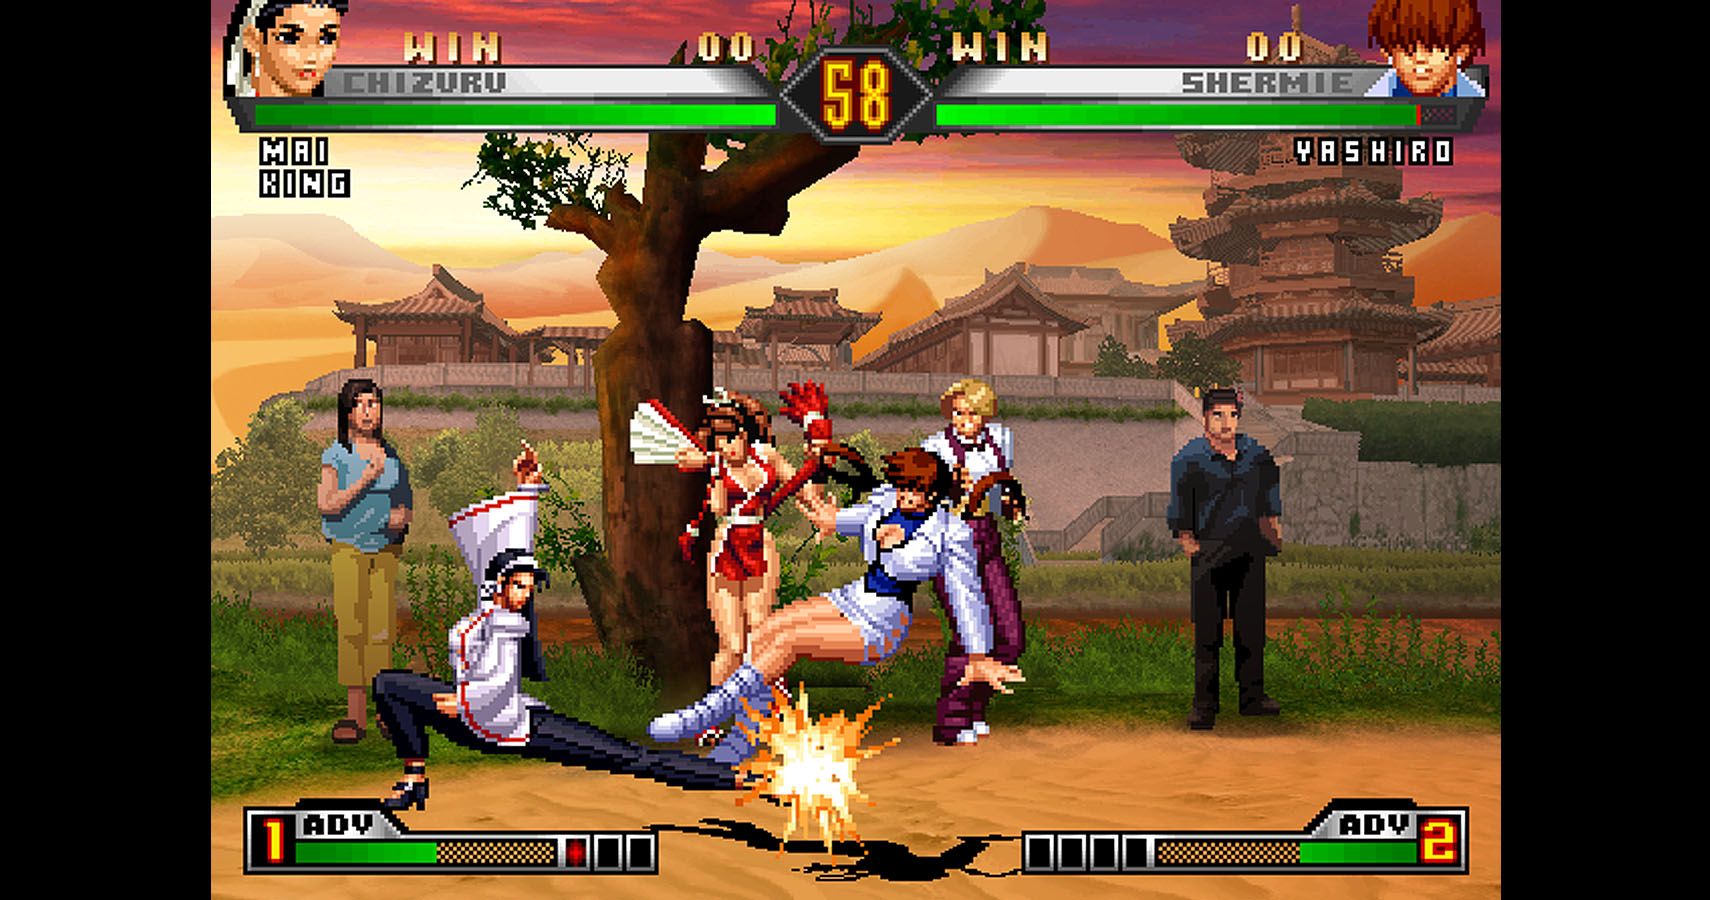 Chizuru attacks Shermie, while Mai and King watch in The King Of Fighters '98 UM.